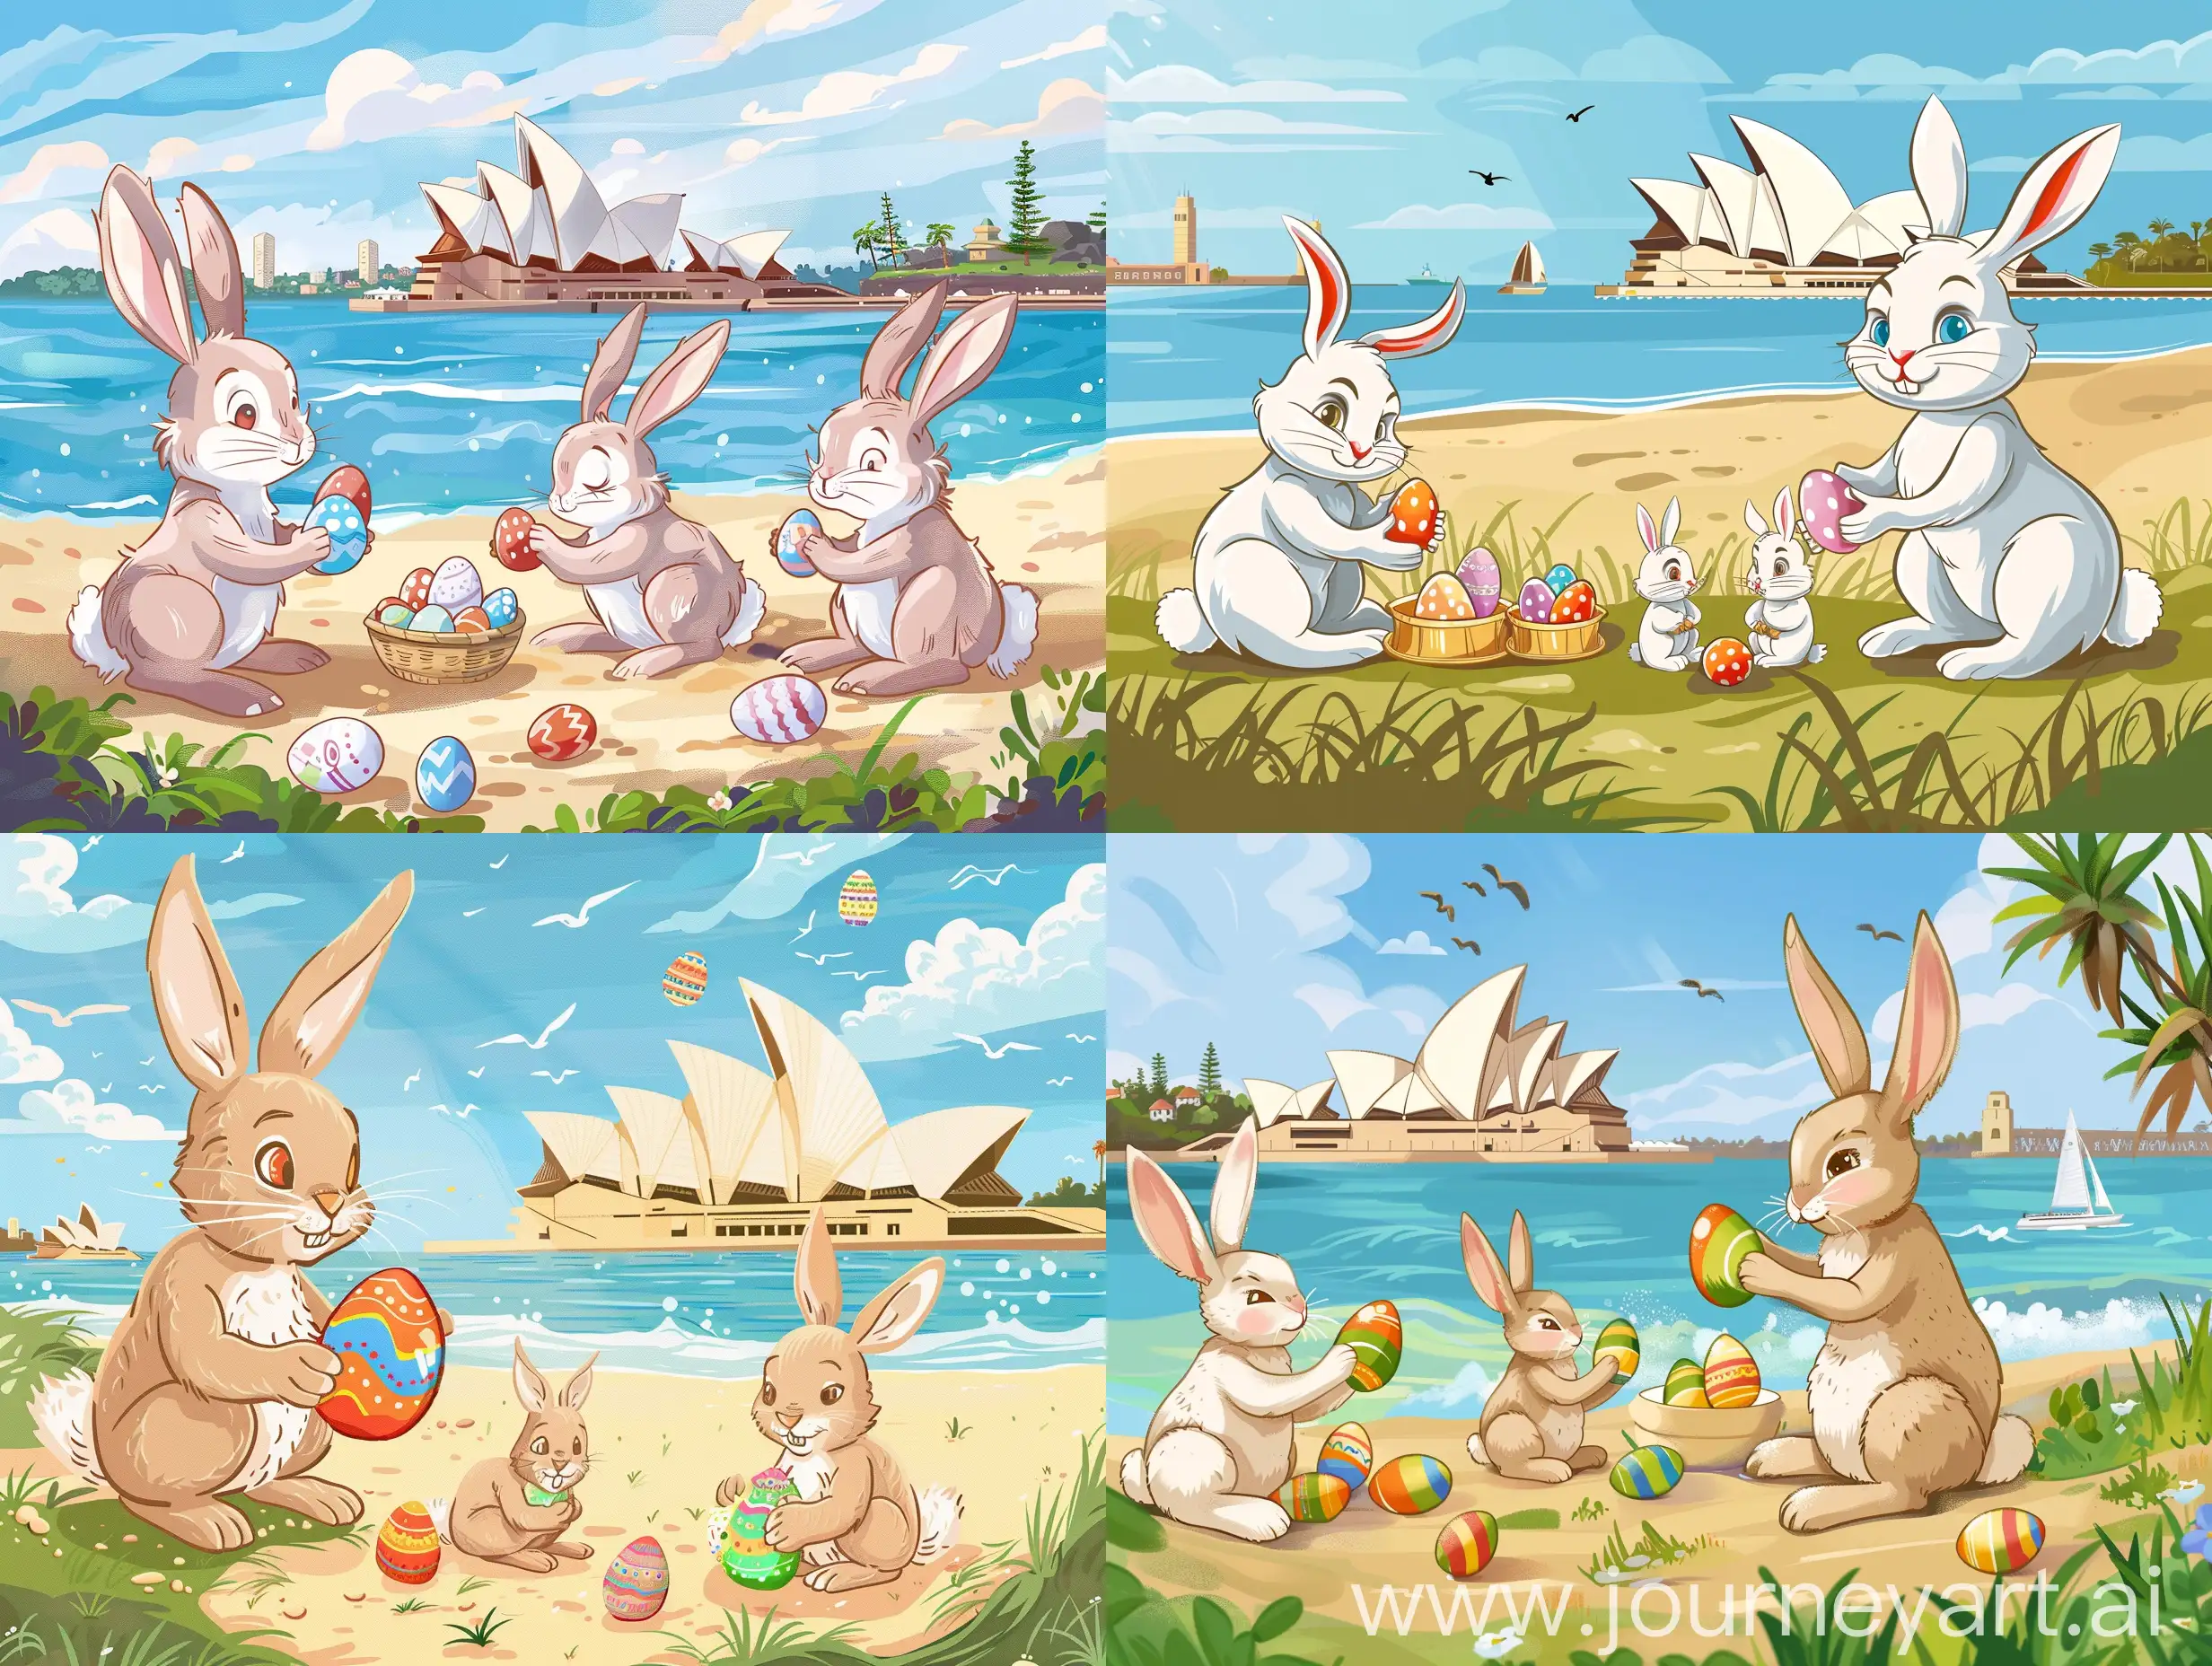 Cartoon style Easter bunny family preparing Easter egg gifts on the beach with Sydney Opera House in the background